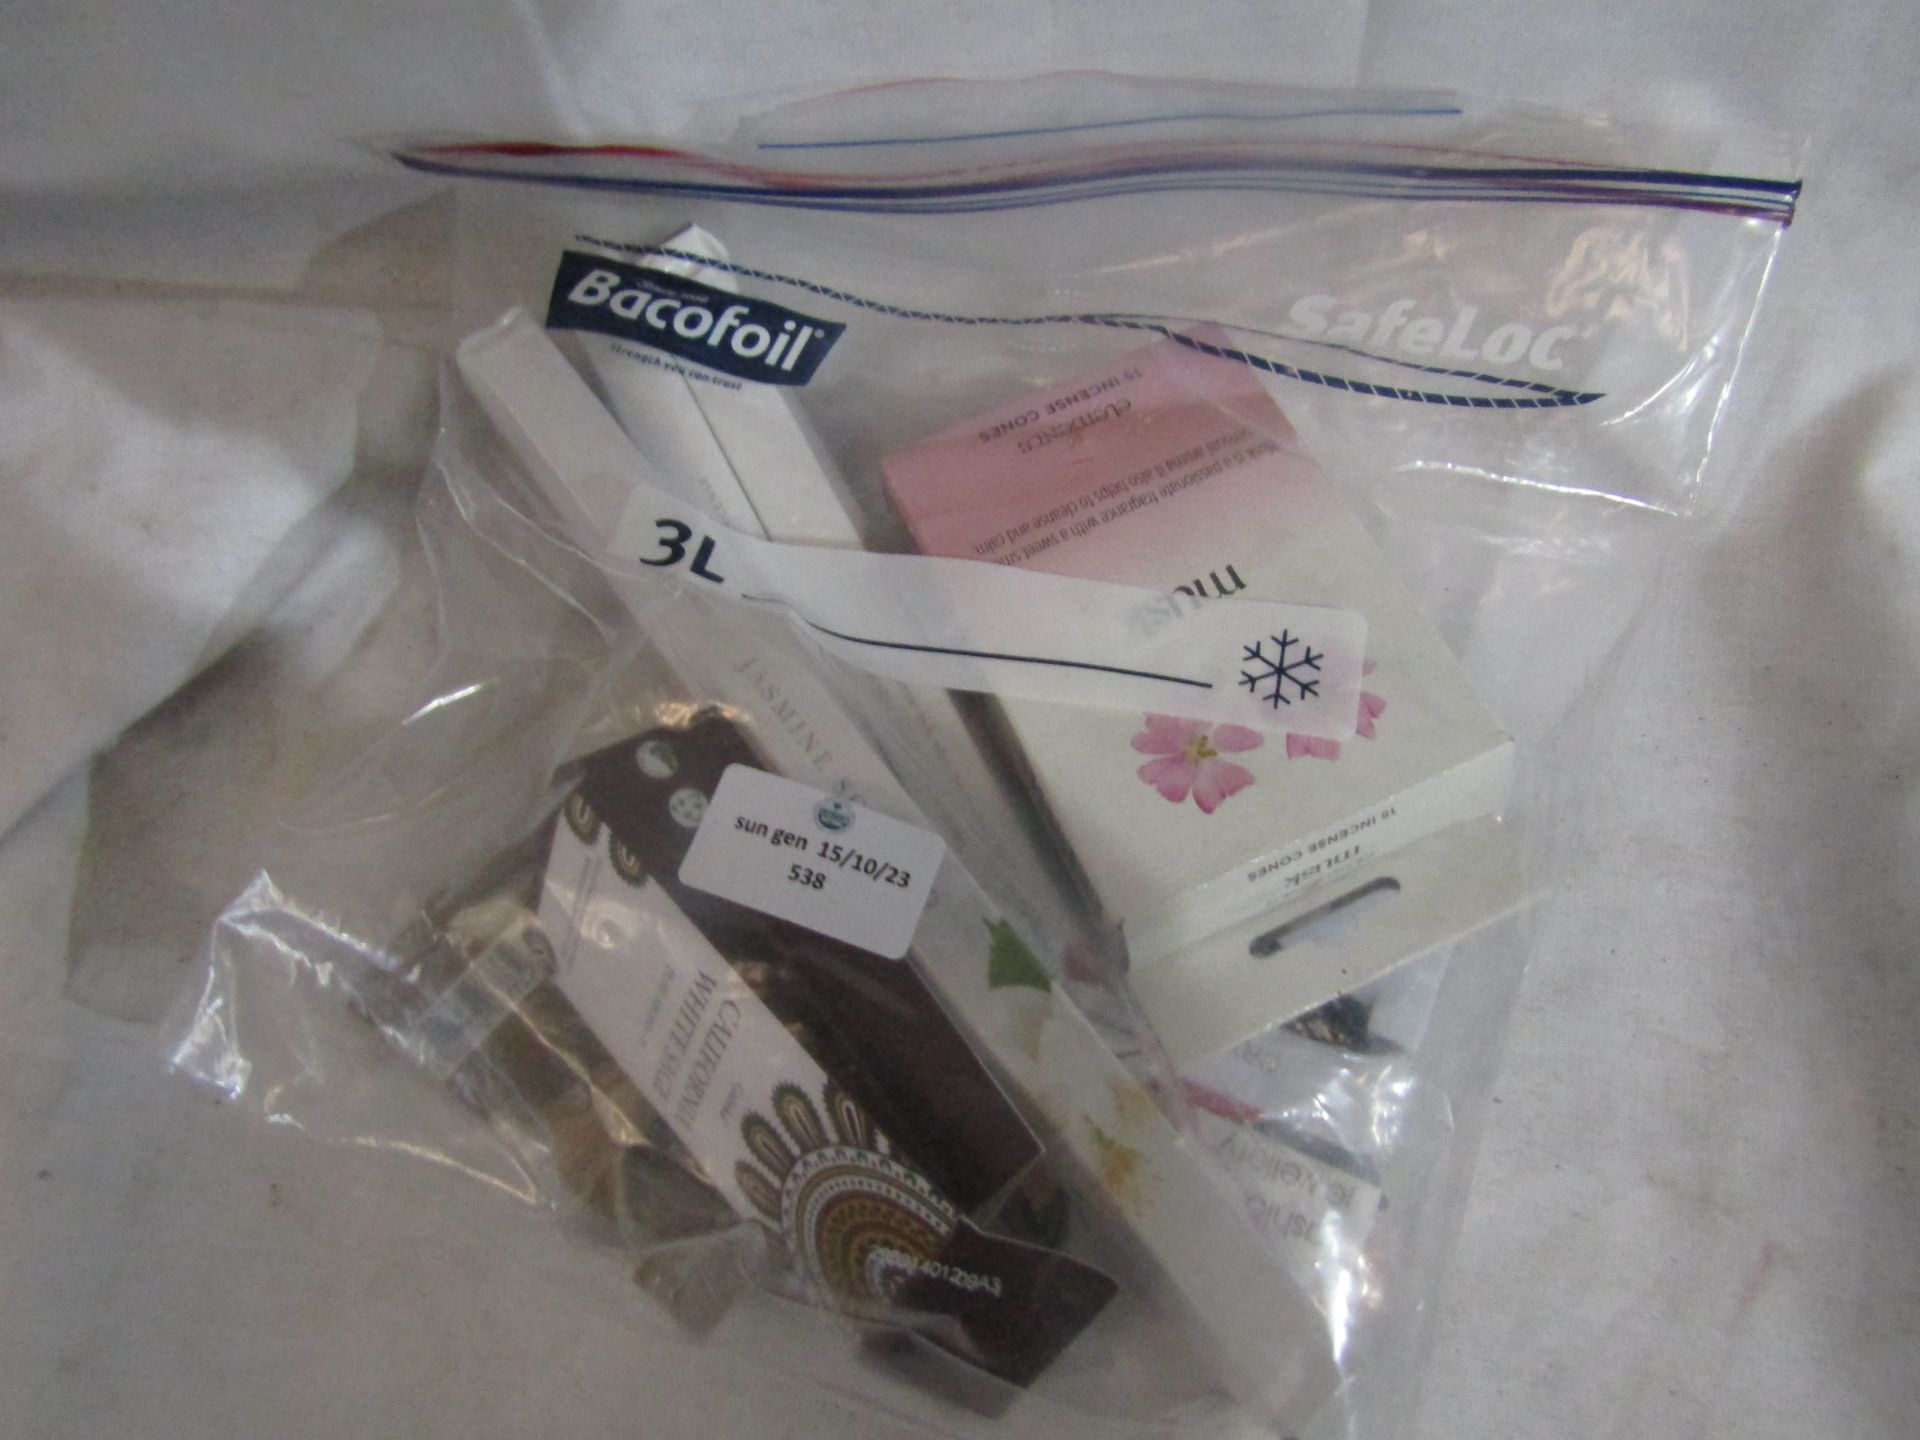 Lot Containing 11 Items being Earings Necklace Ponytail Covers 3 X 8 PK of Incense Sticks 1 X PK